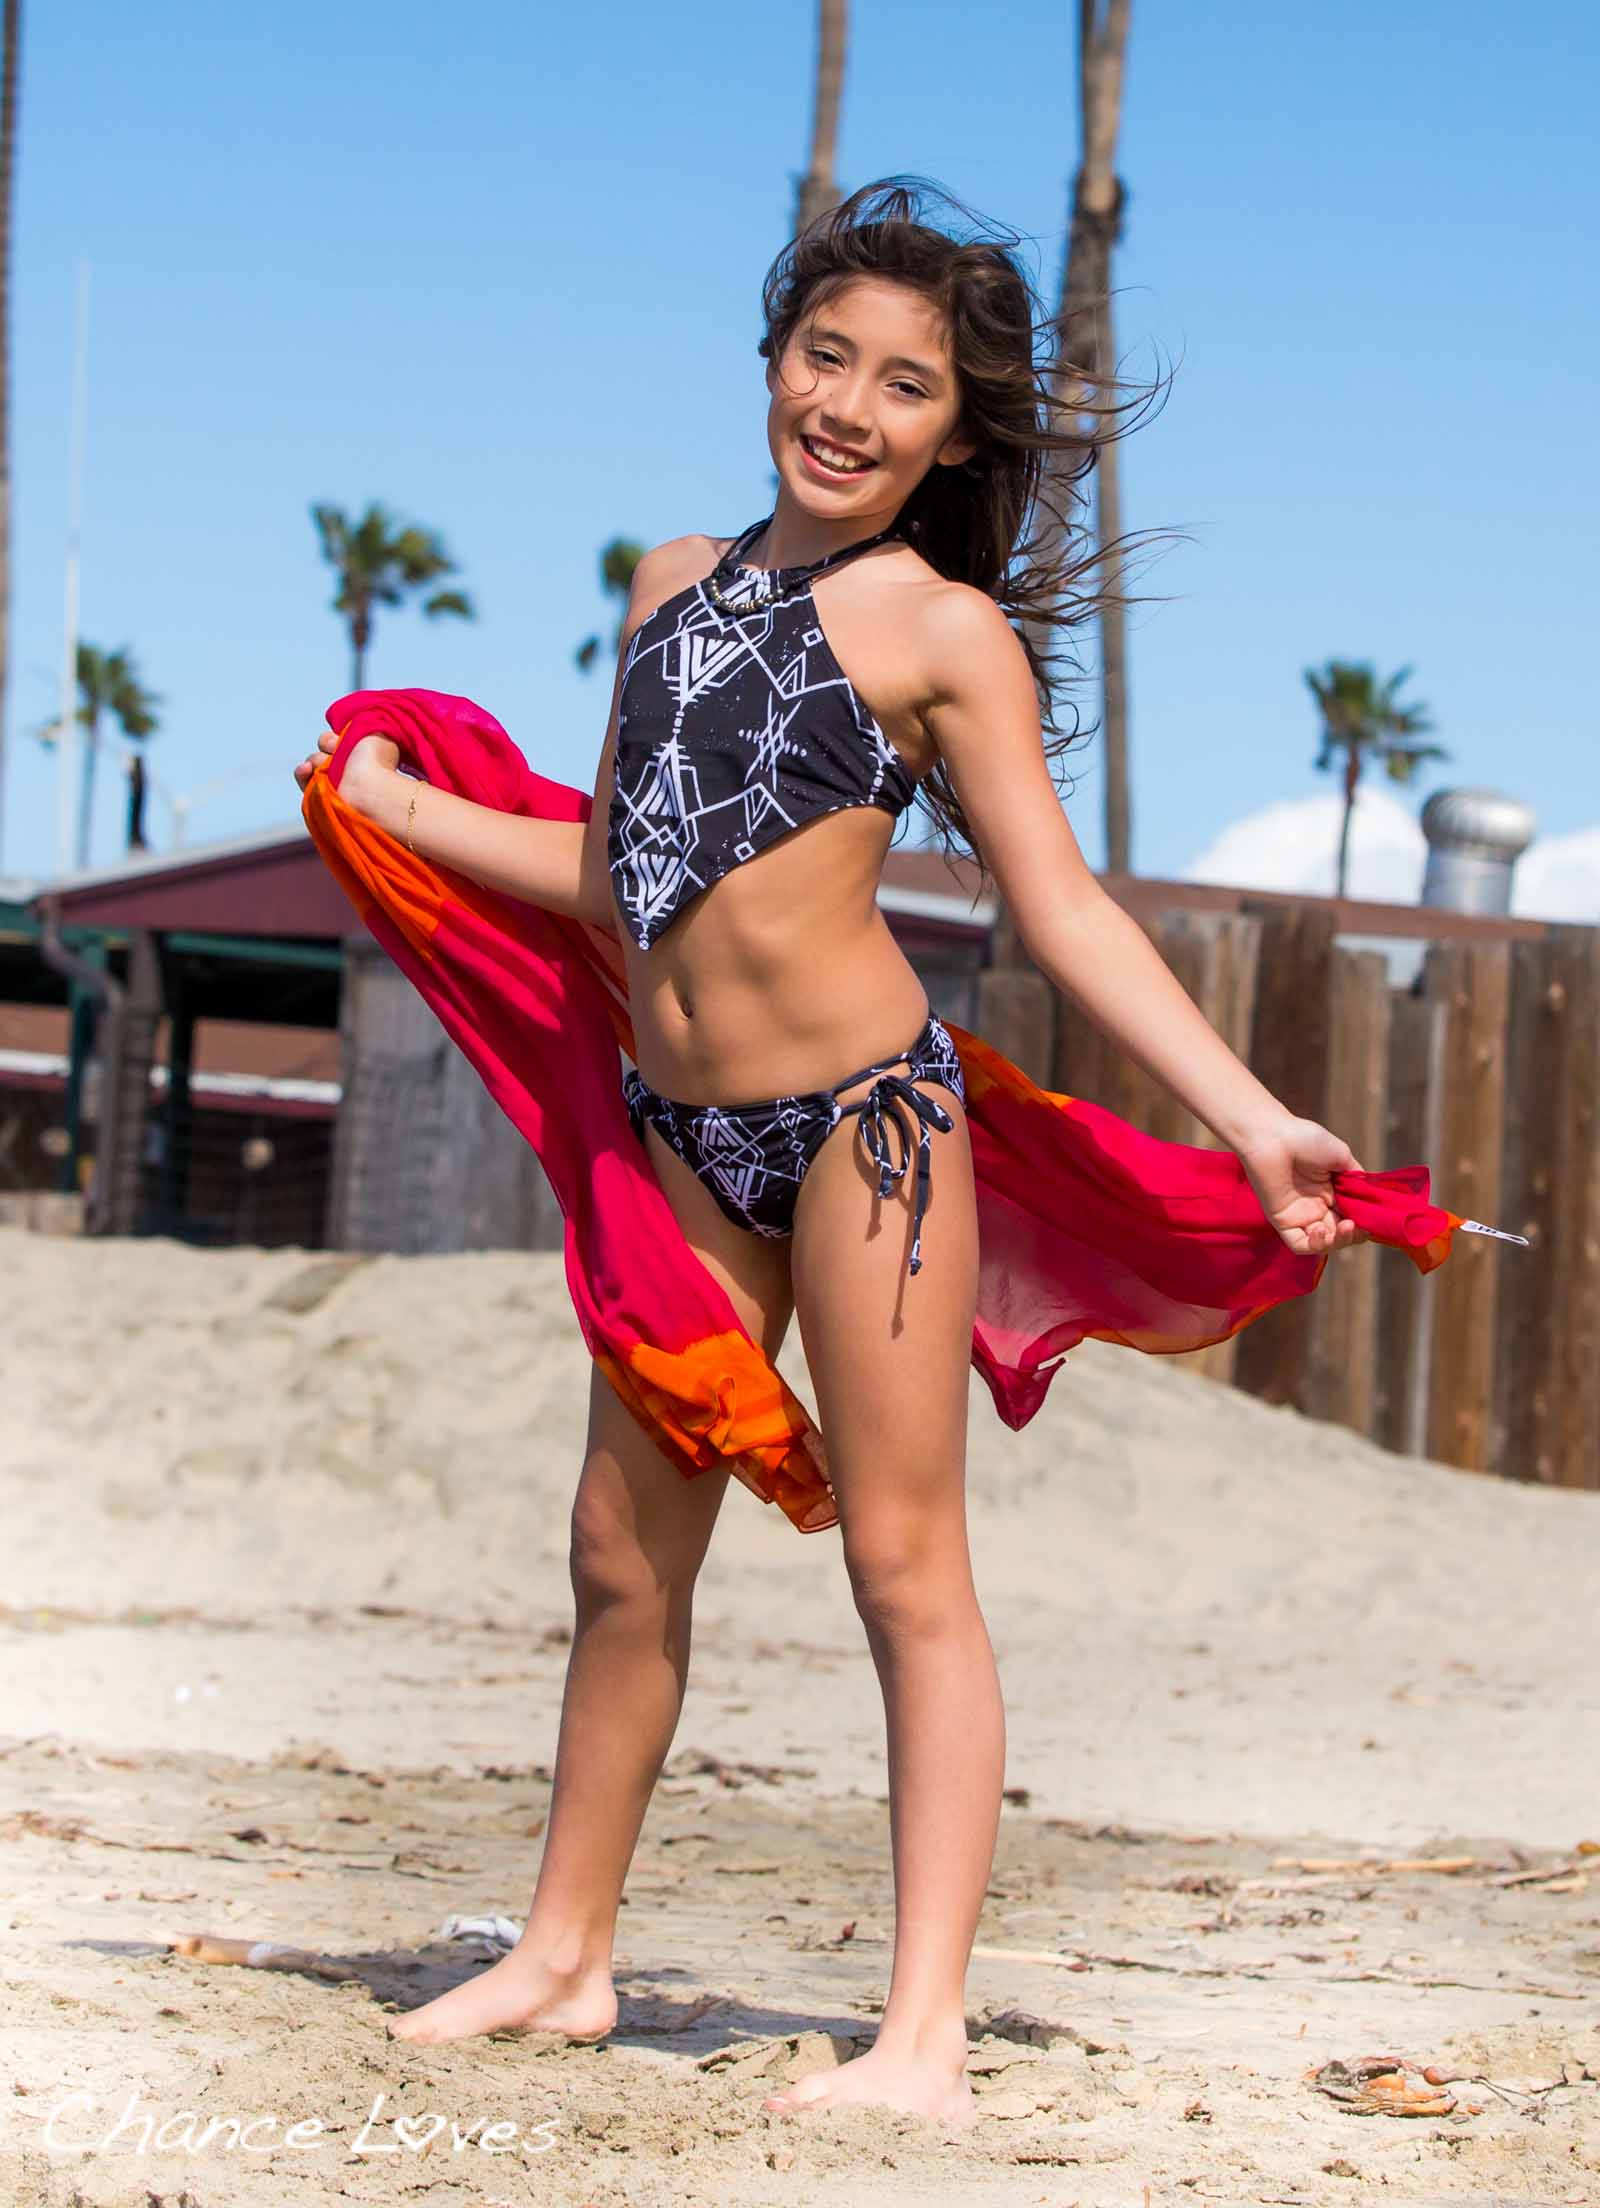 A 10 year old girl is laughing on the beach wearing a unique 2 piece swimsuit